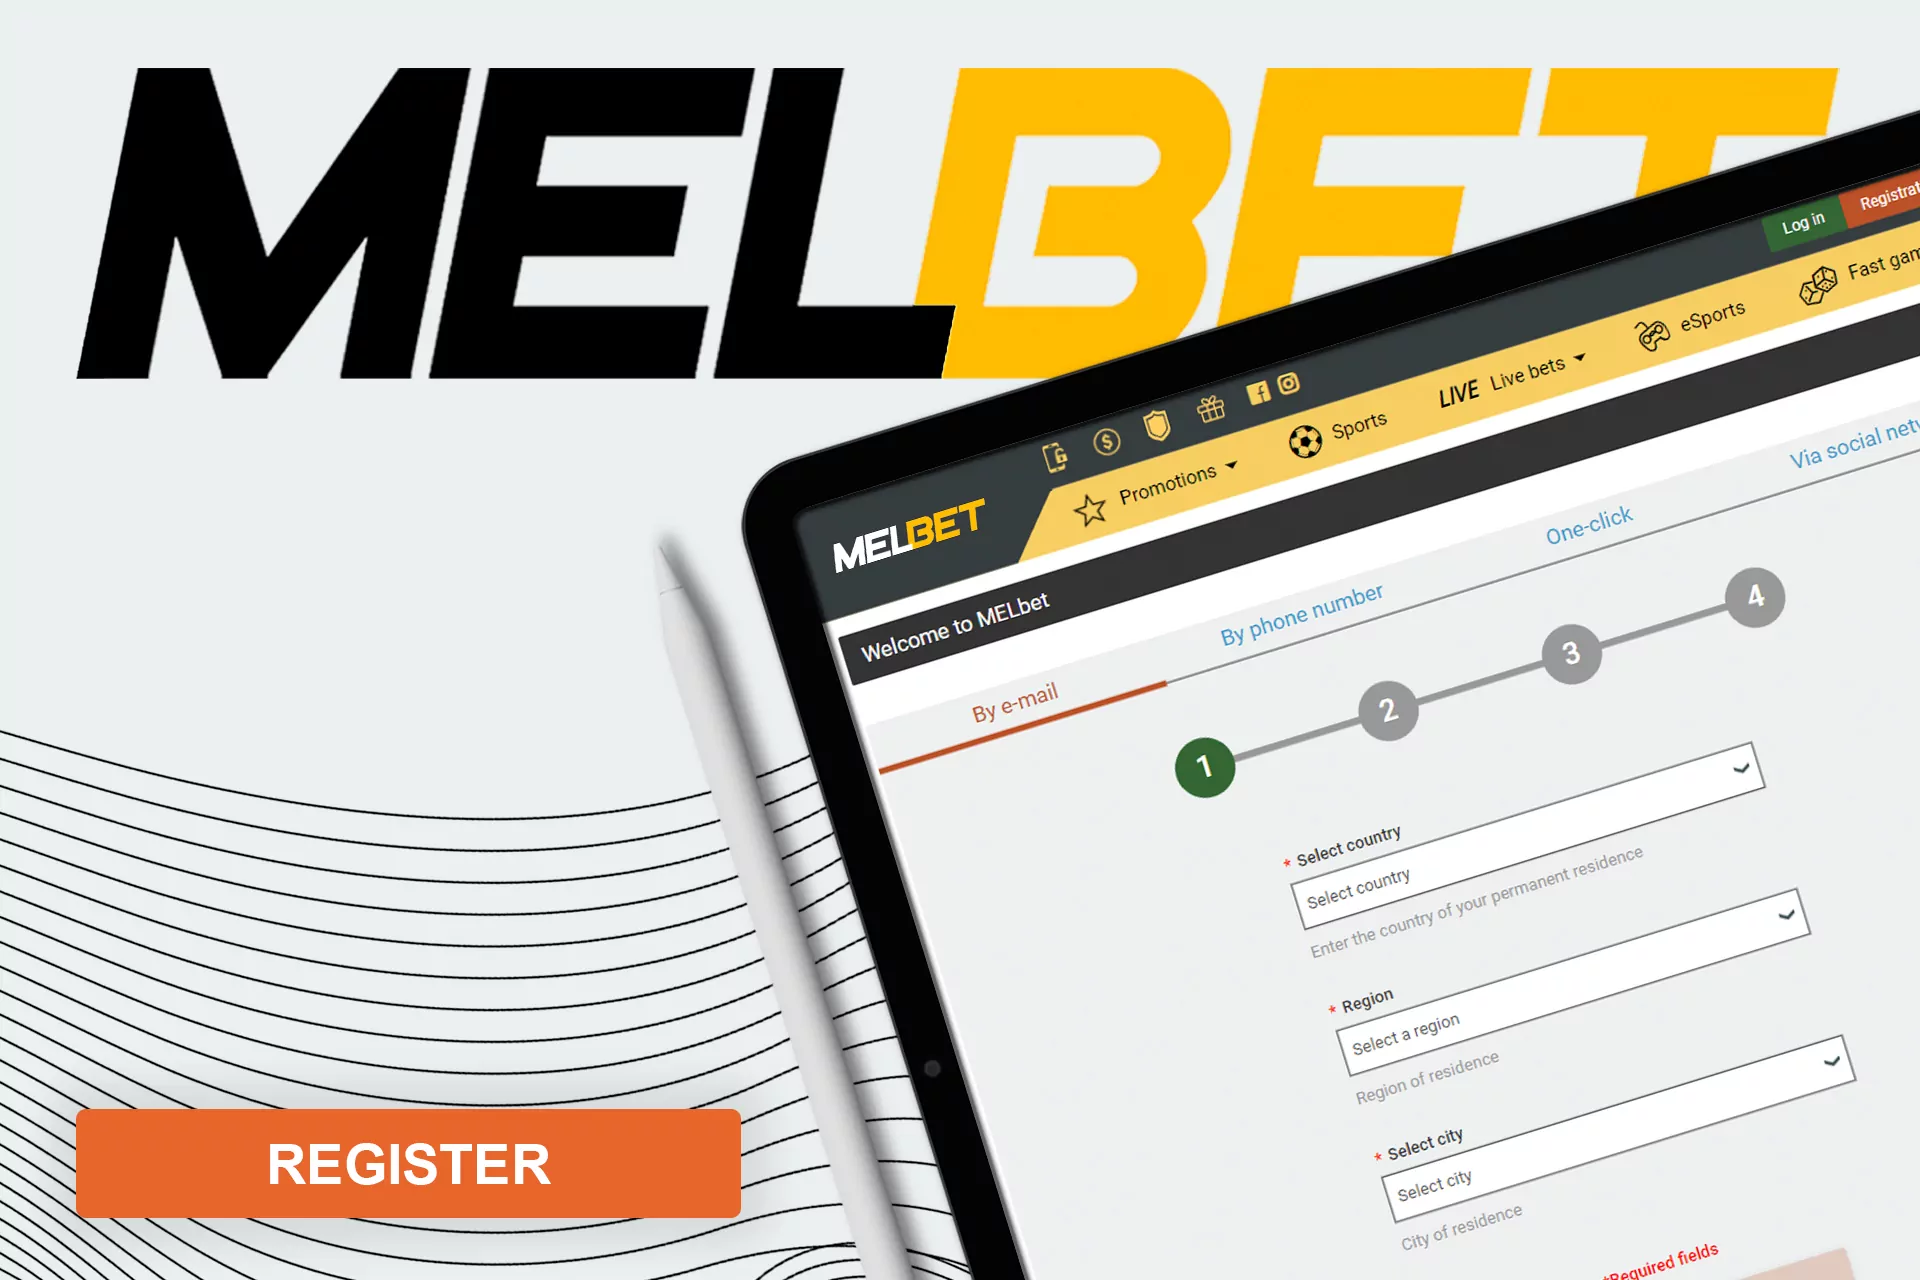 The first method of registration available at Melbet is by e-mail.